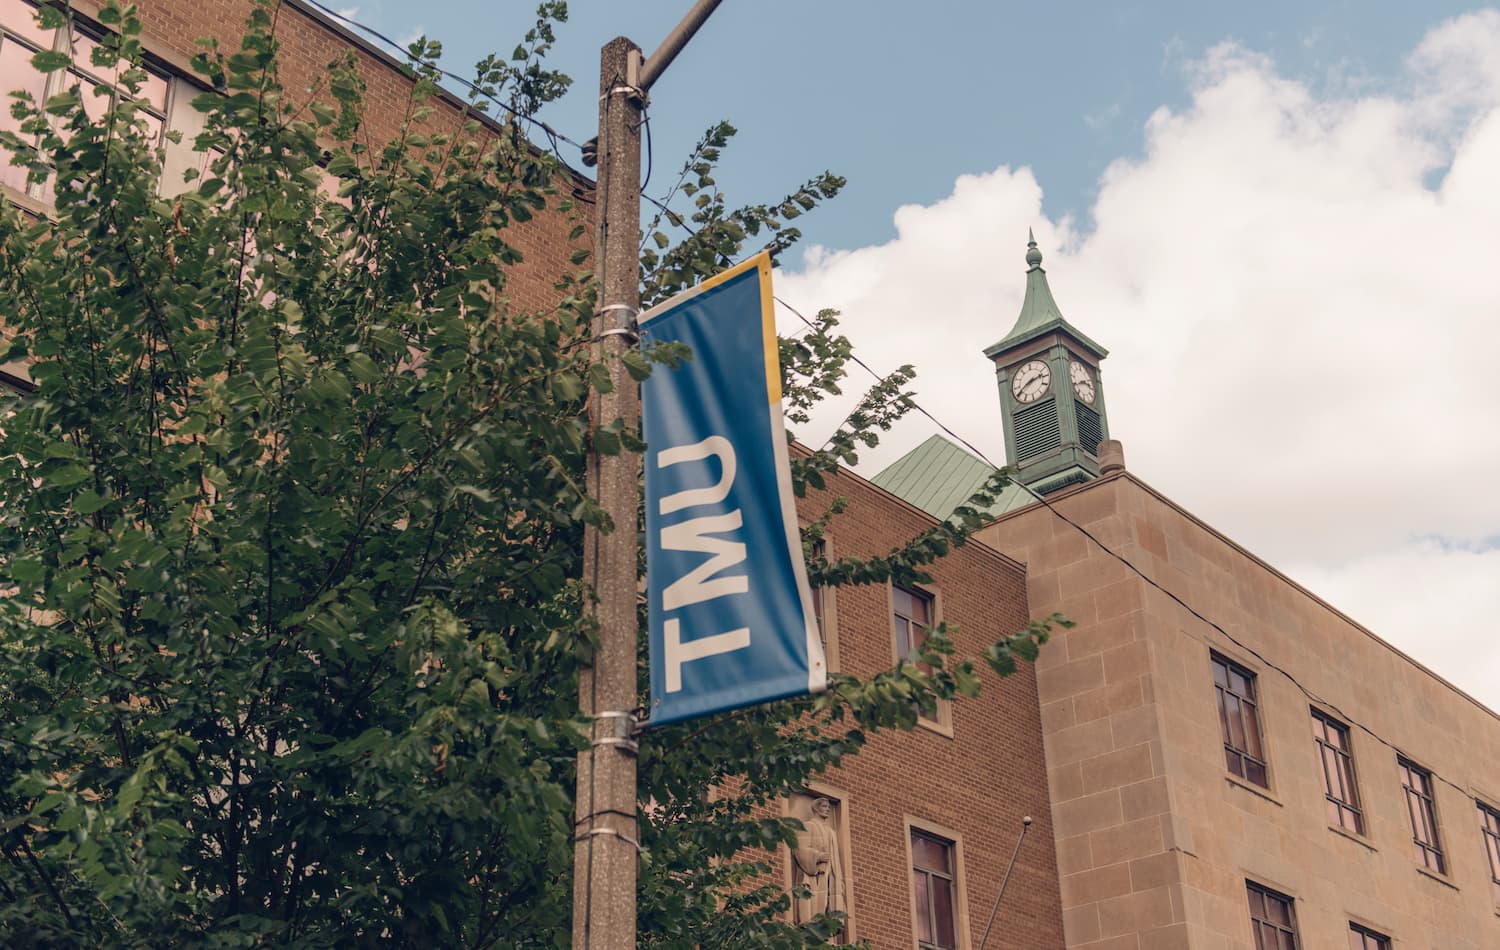 TMU street flag in front of a campus building against a backdrop of blue sky.